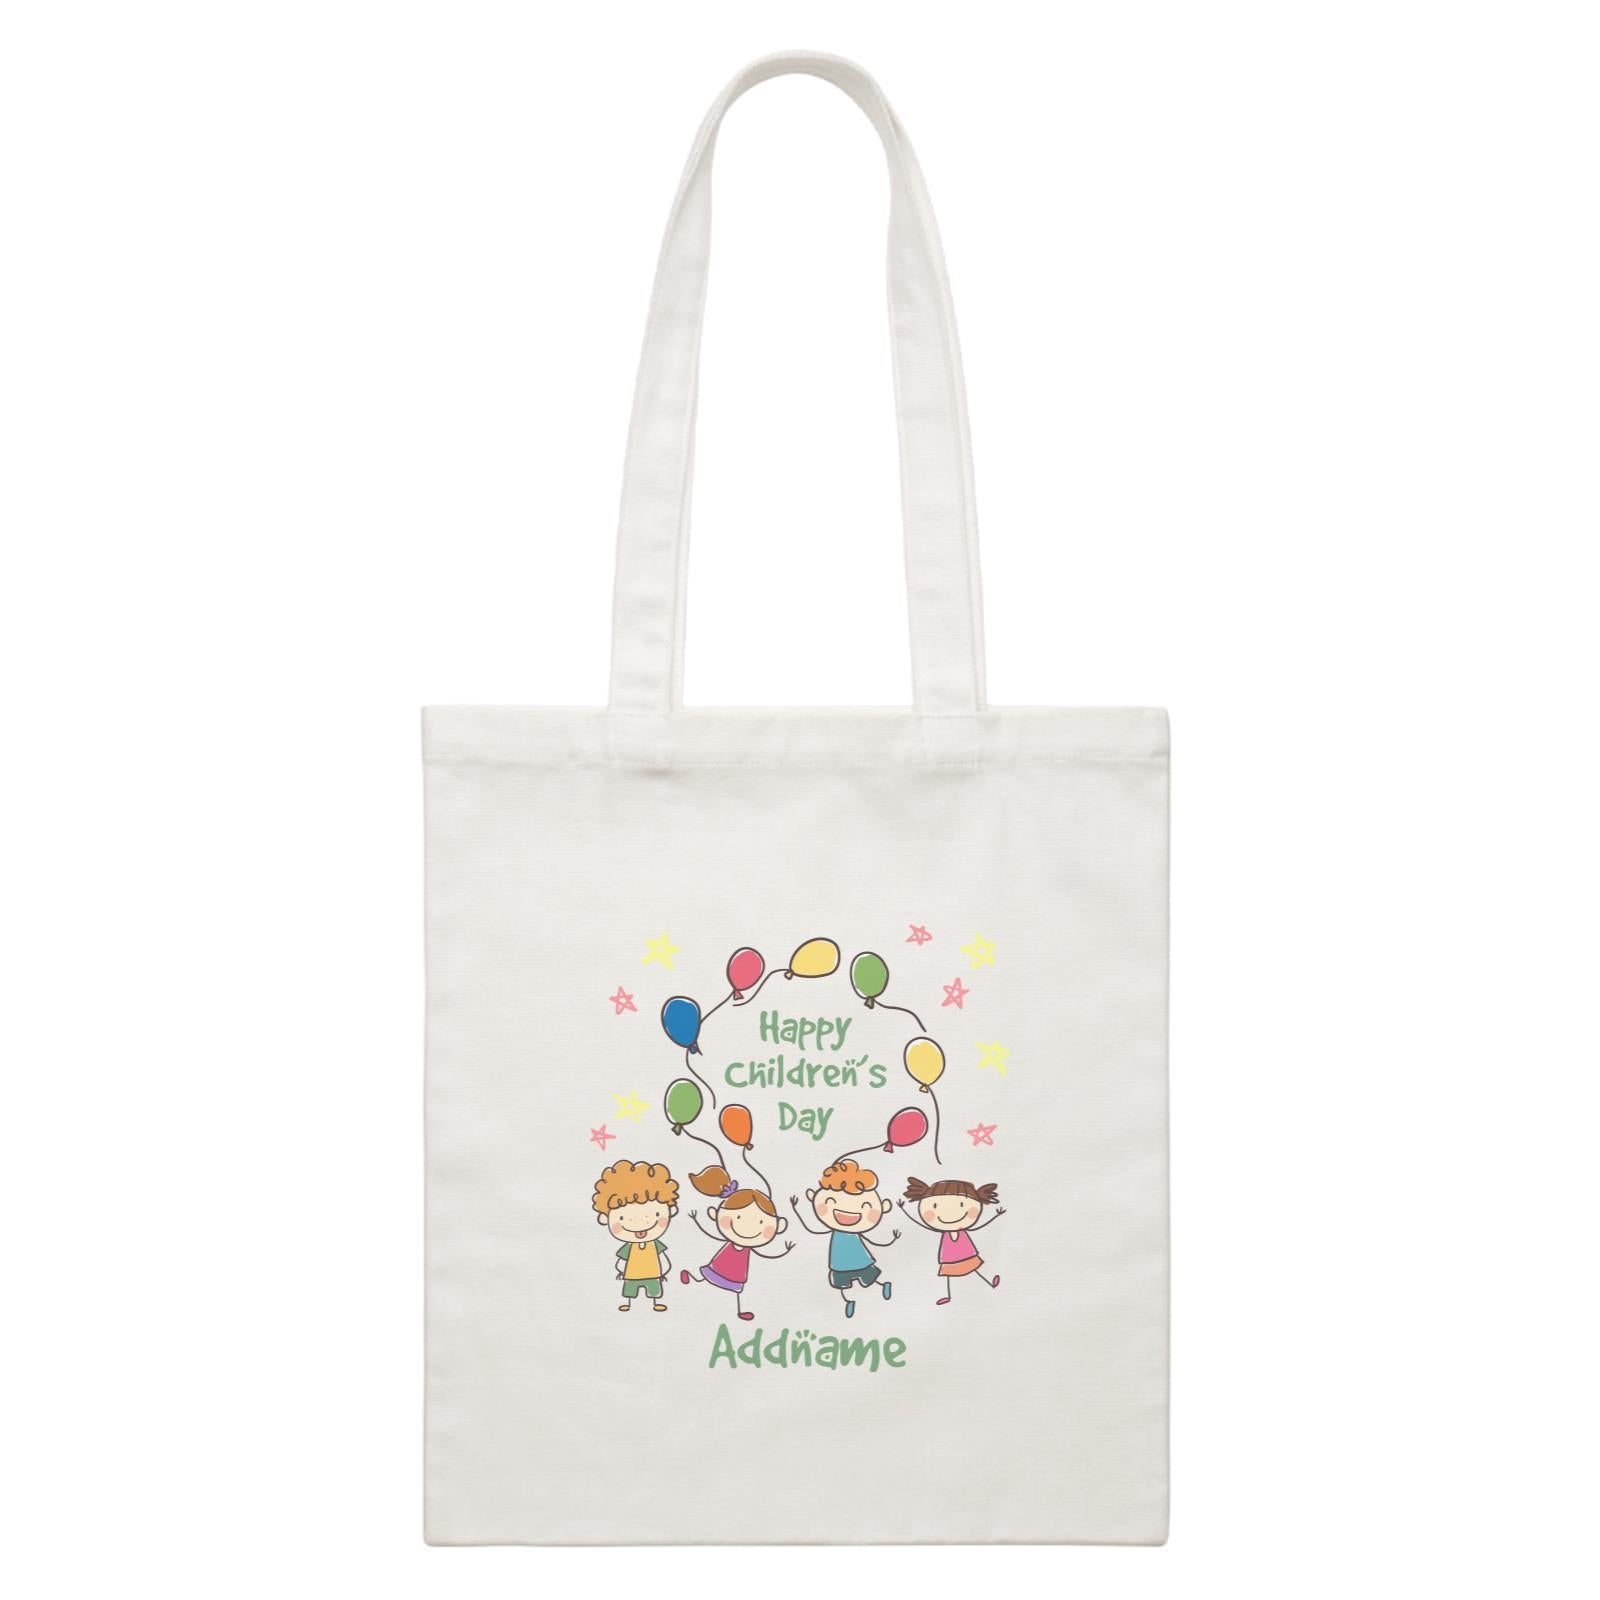 Children's Day Gift Series Four Cute Children With Balloons Addname  Canvas Bag